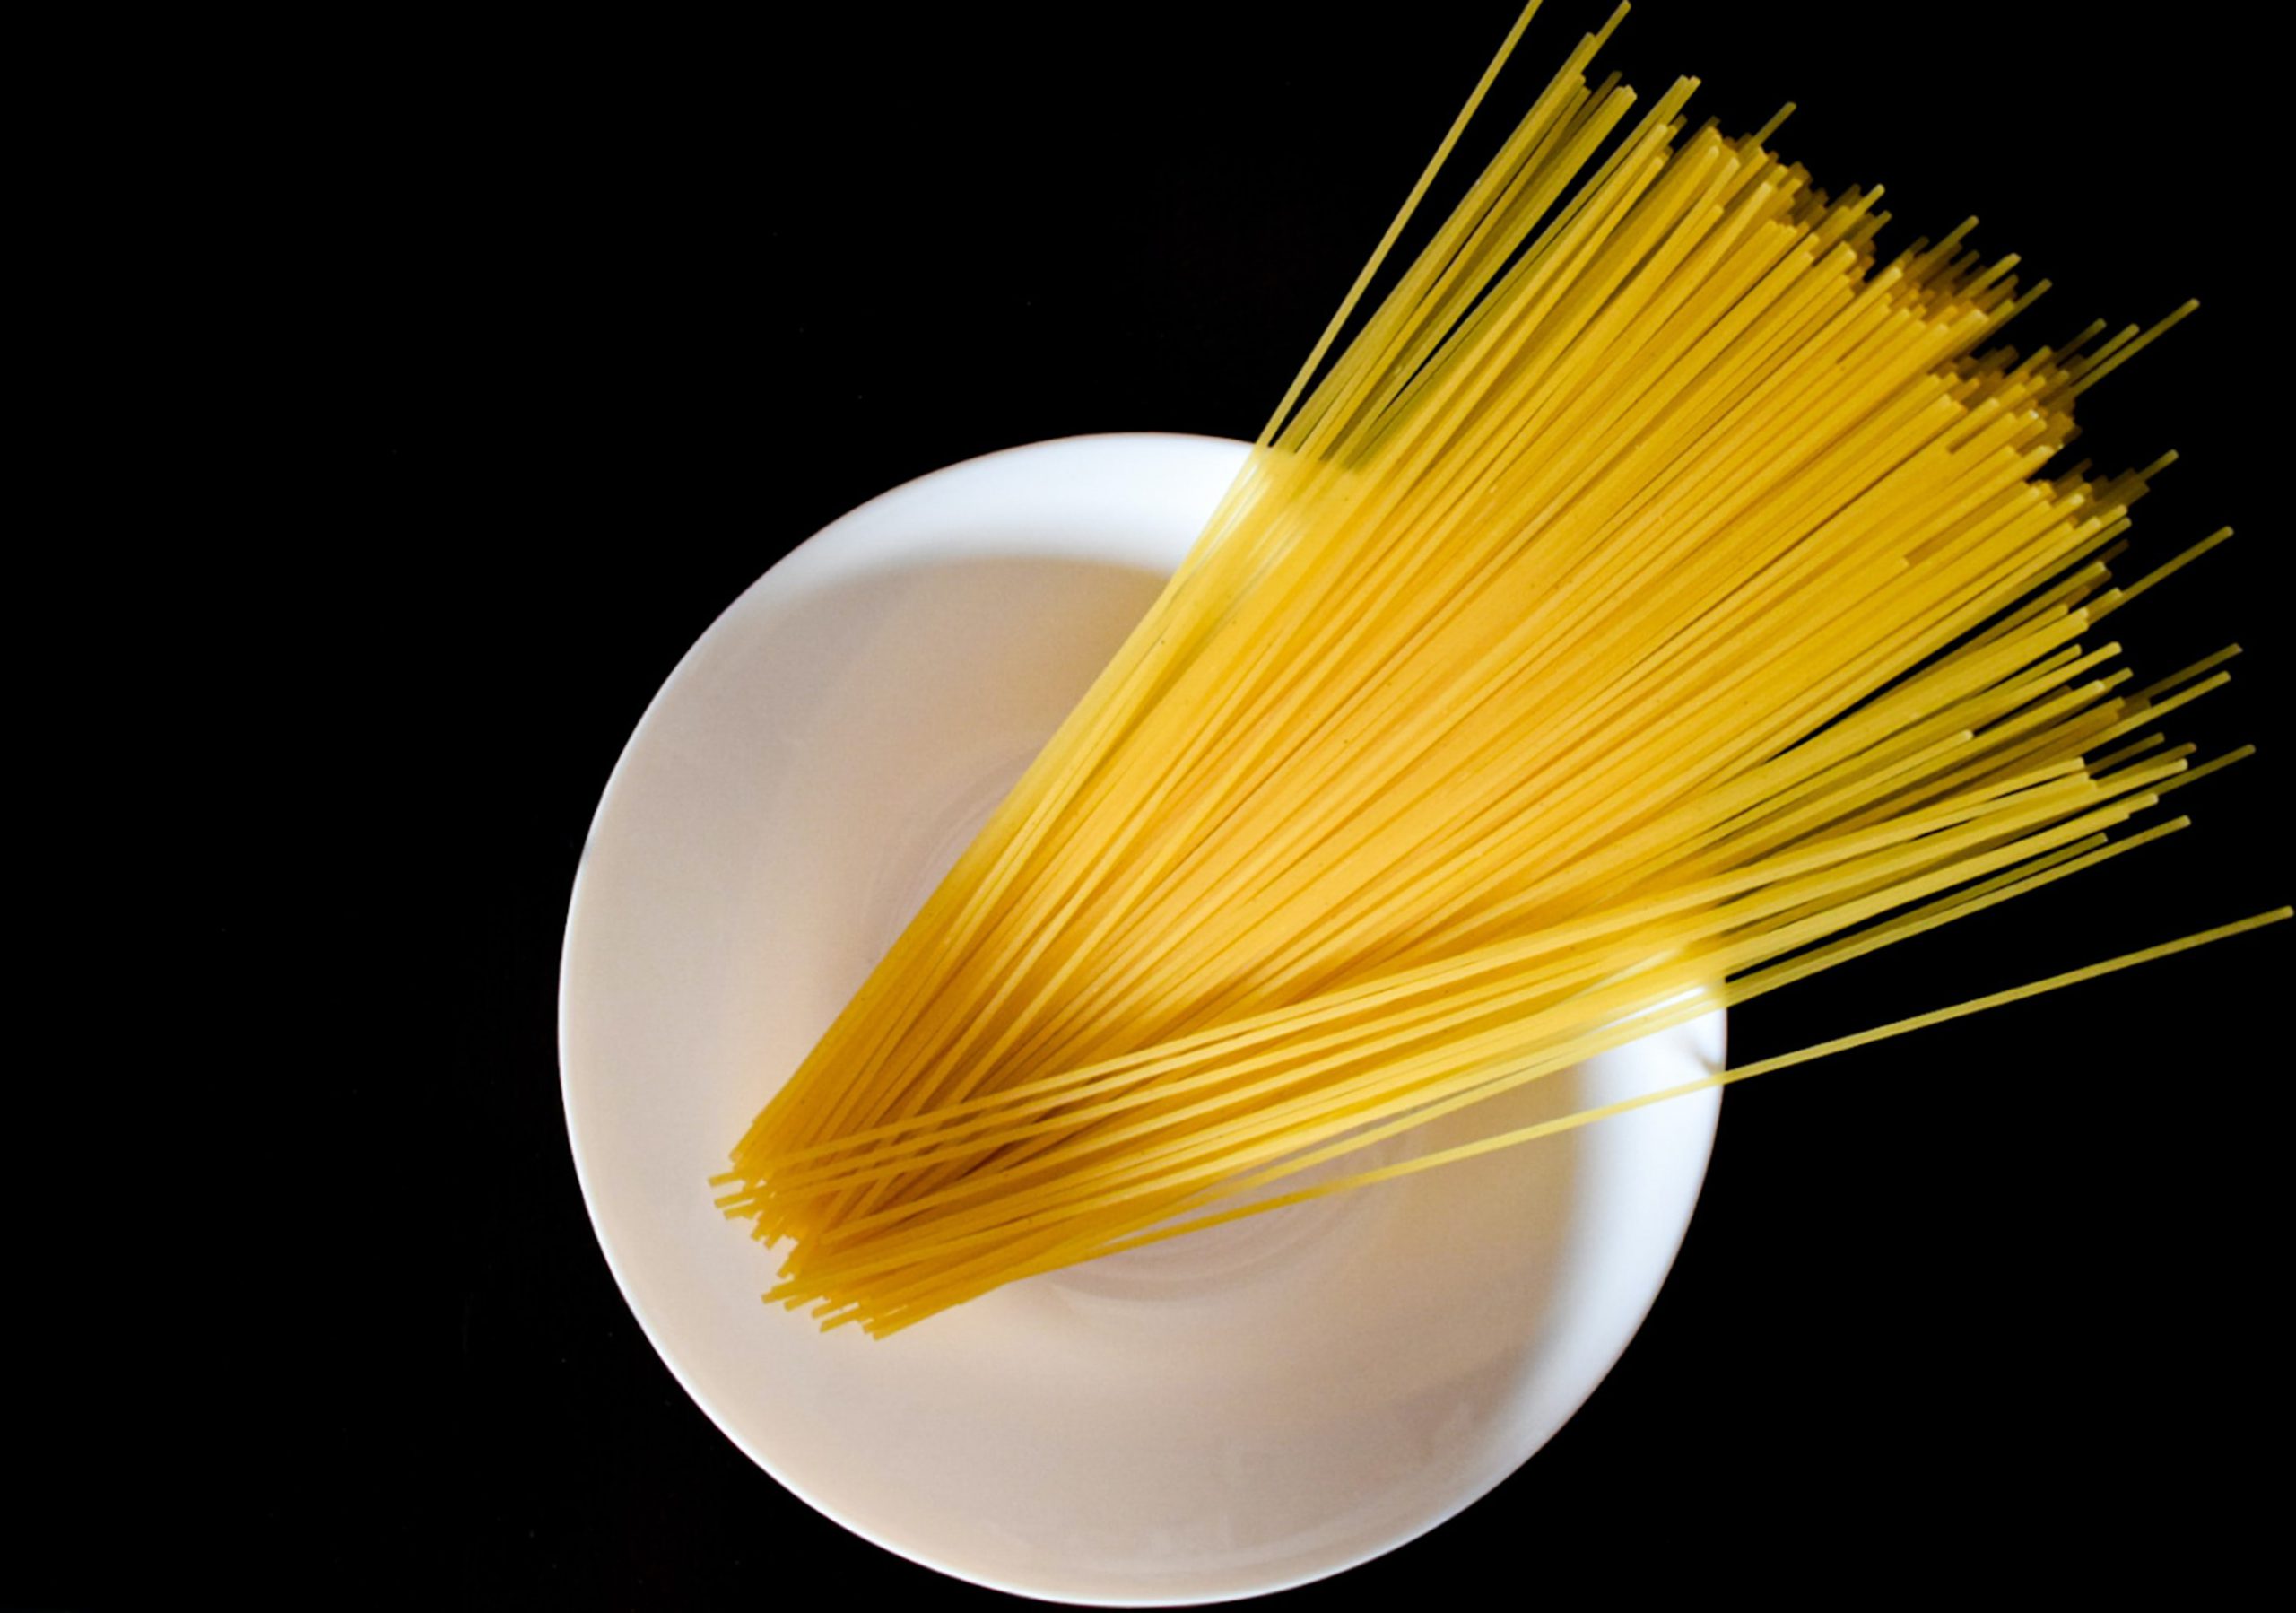 Pasta la vista! Food fans debate which form of Italian staple they couldn't  part with - vote for YOUR favourite in our poll